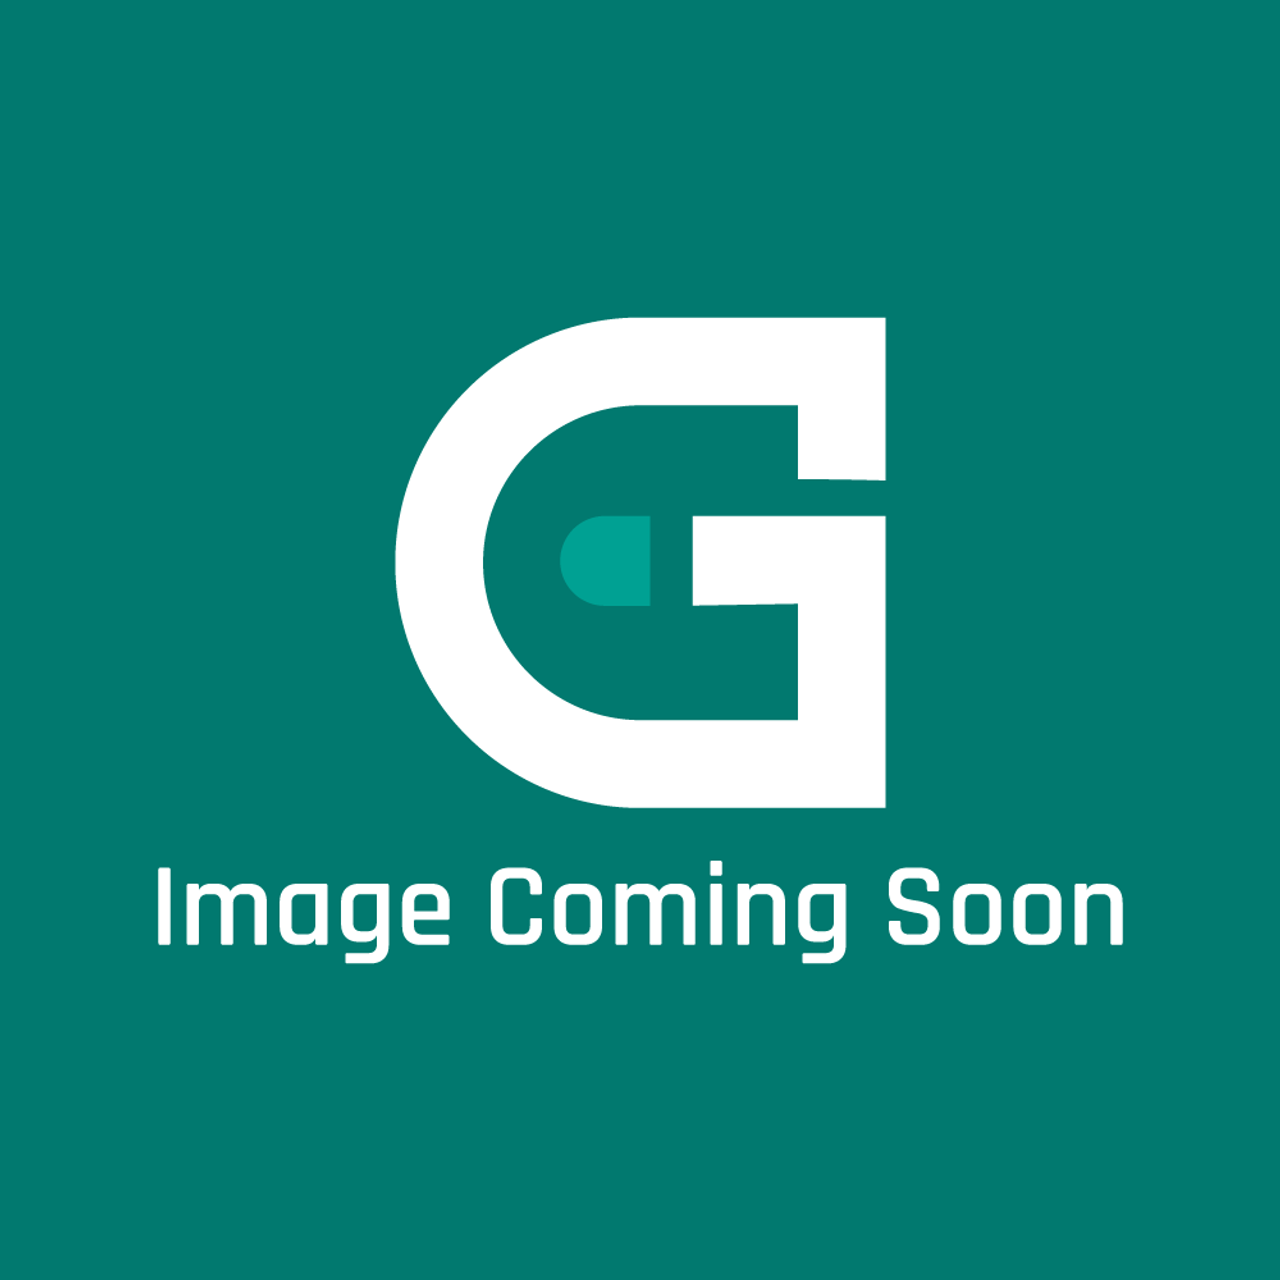 Glastender 113850 - Relay Board Assy Fast Ga S (191 - Image Coming Soon!